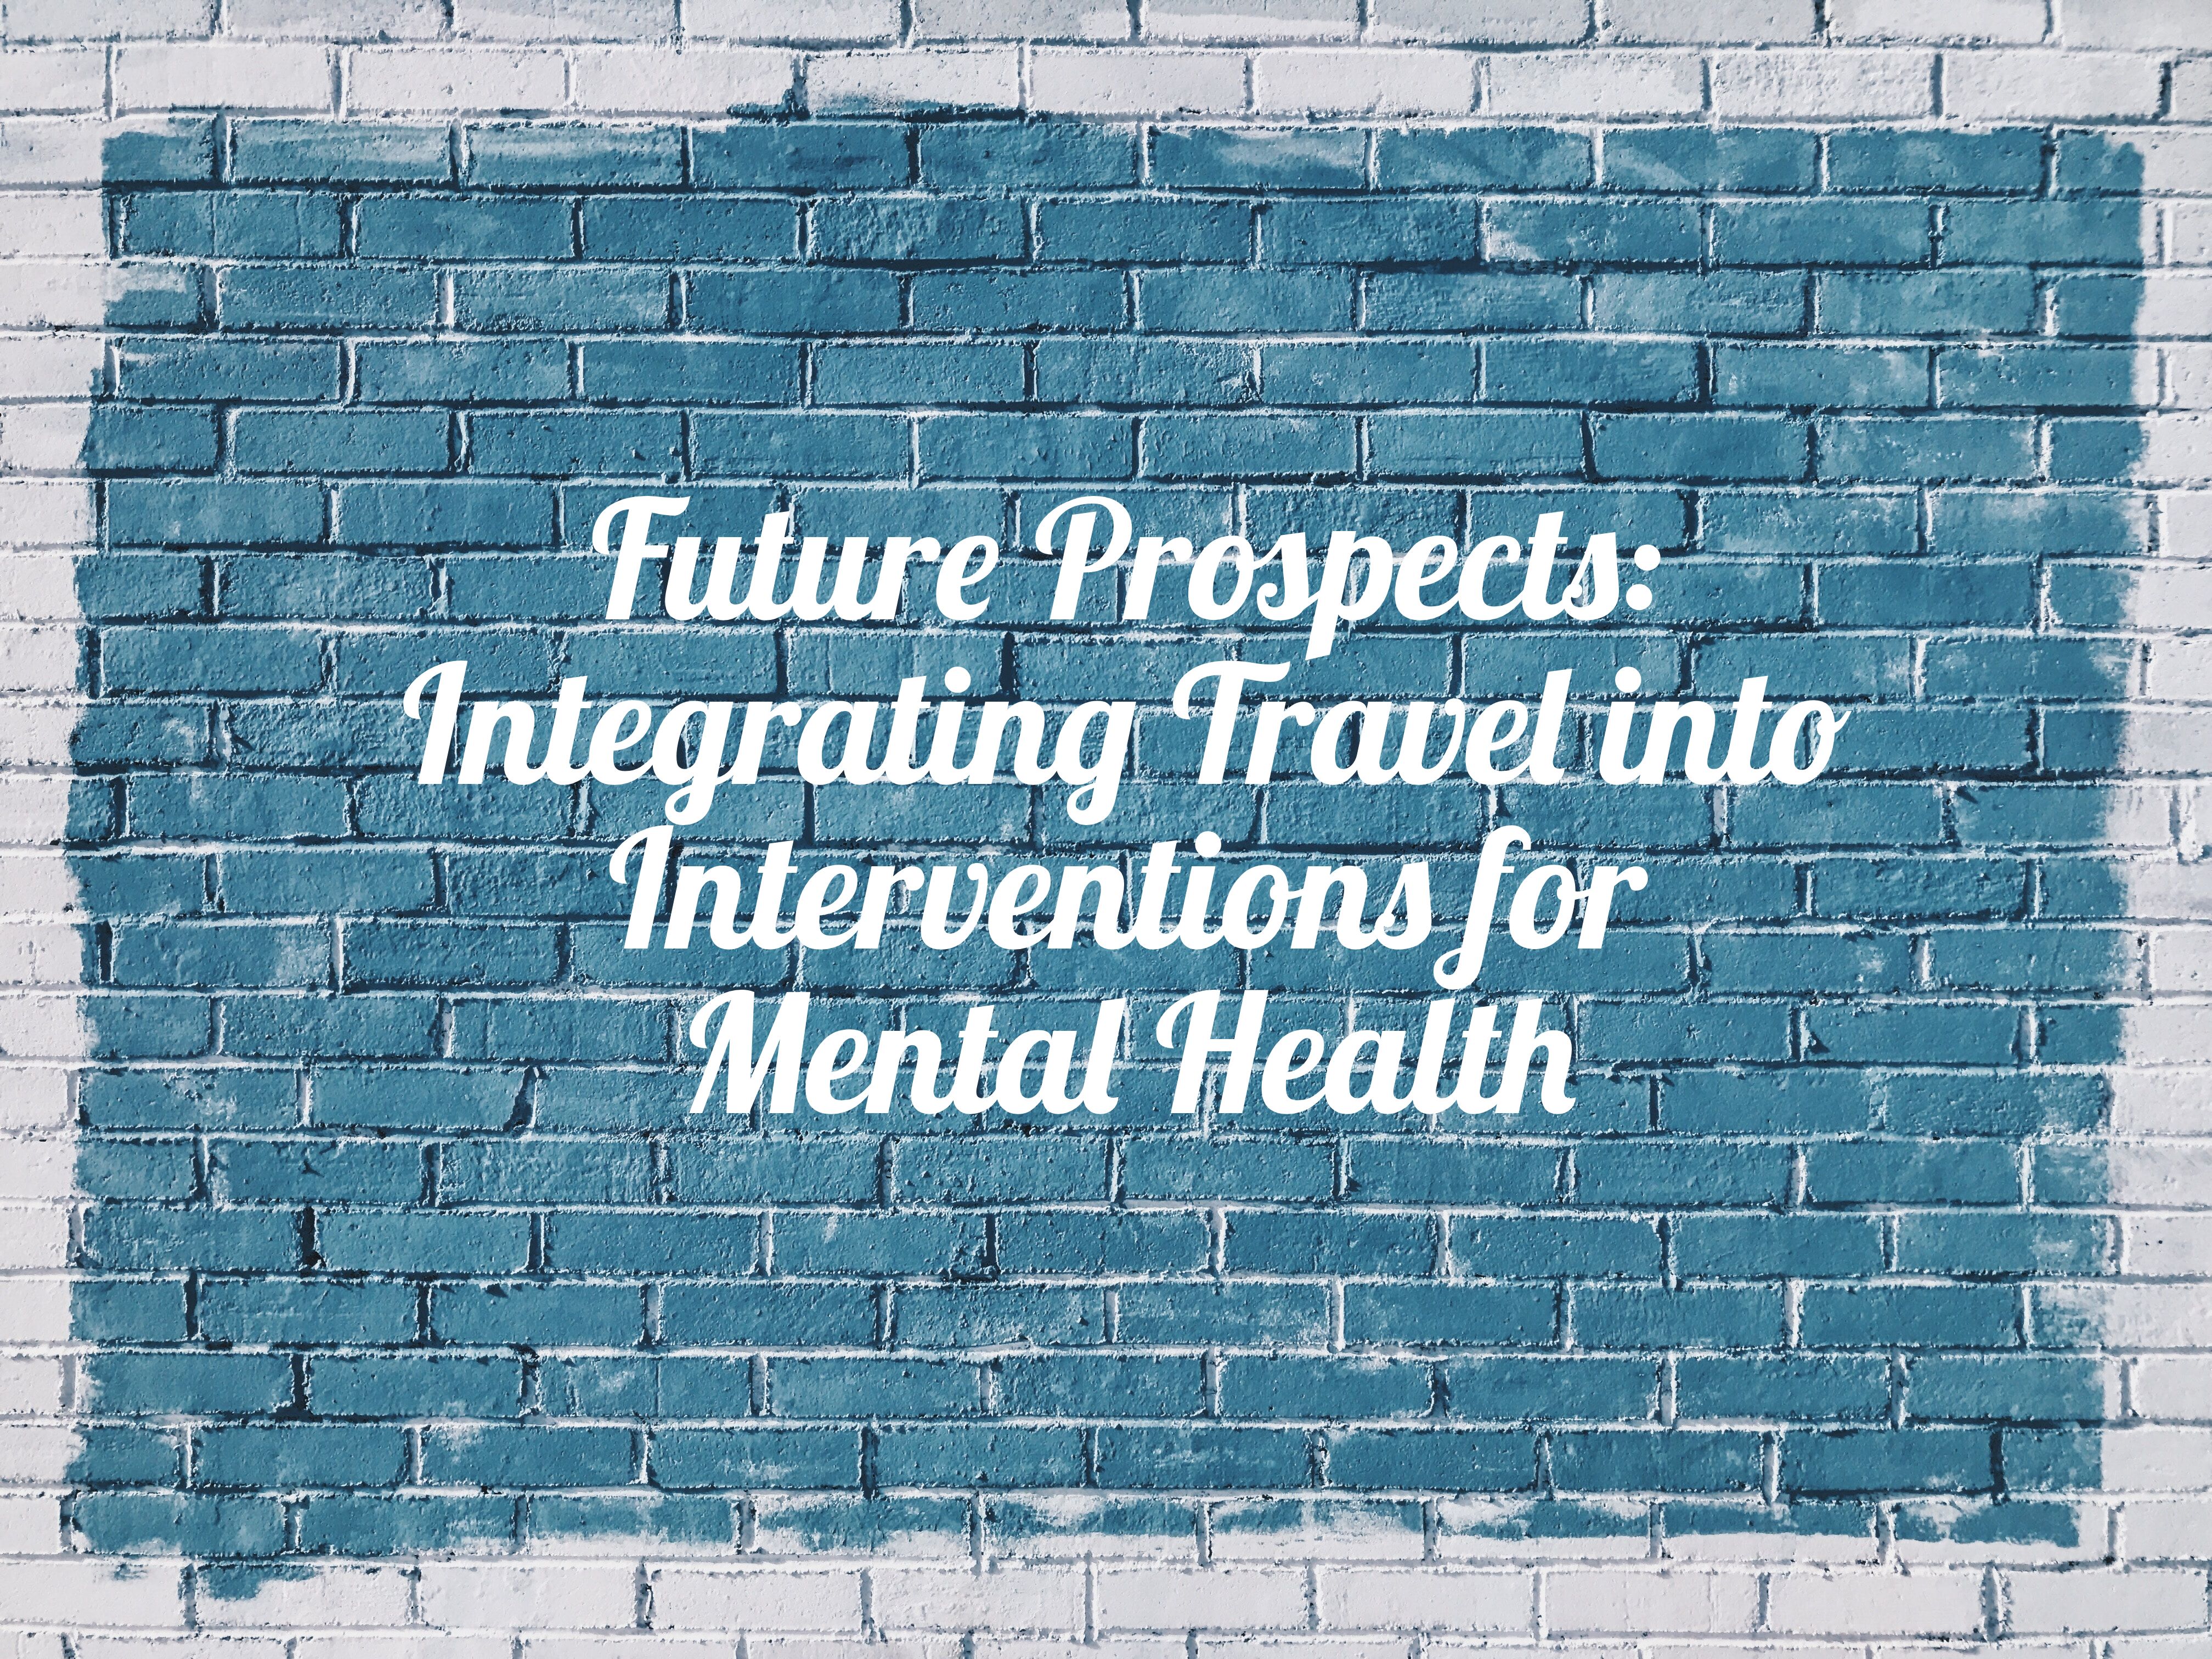 Future Prospects: Integrating Travel into Mental Health Interventions